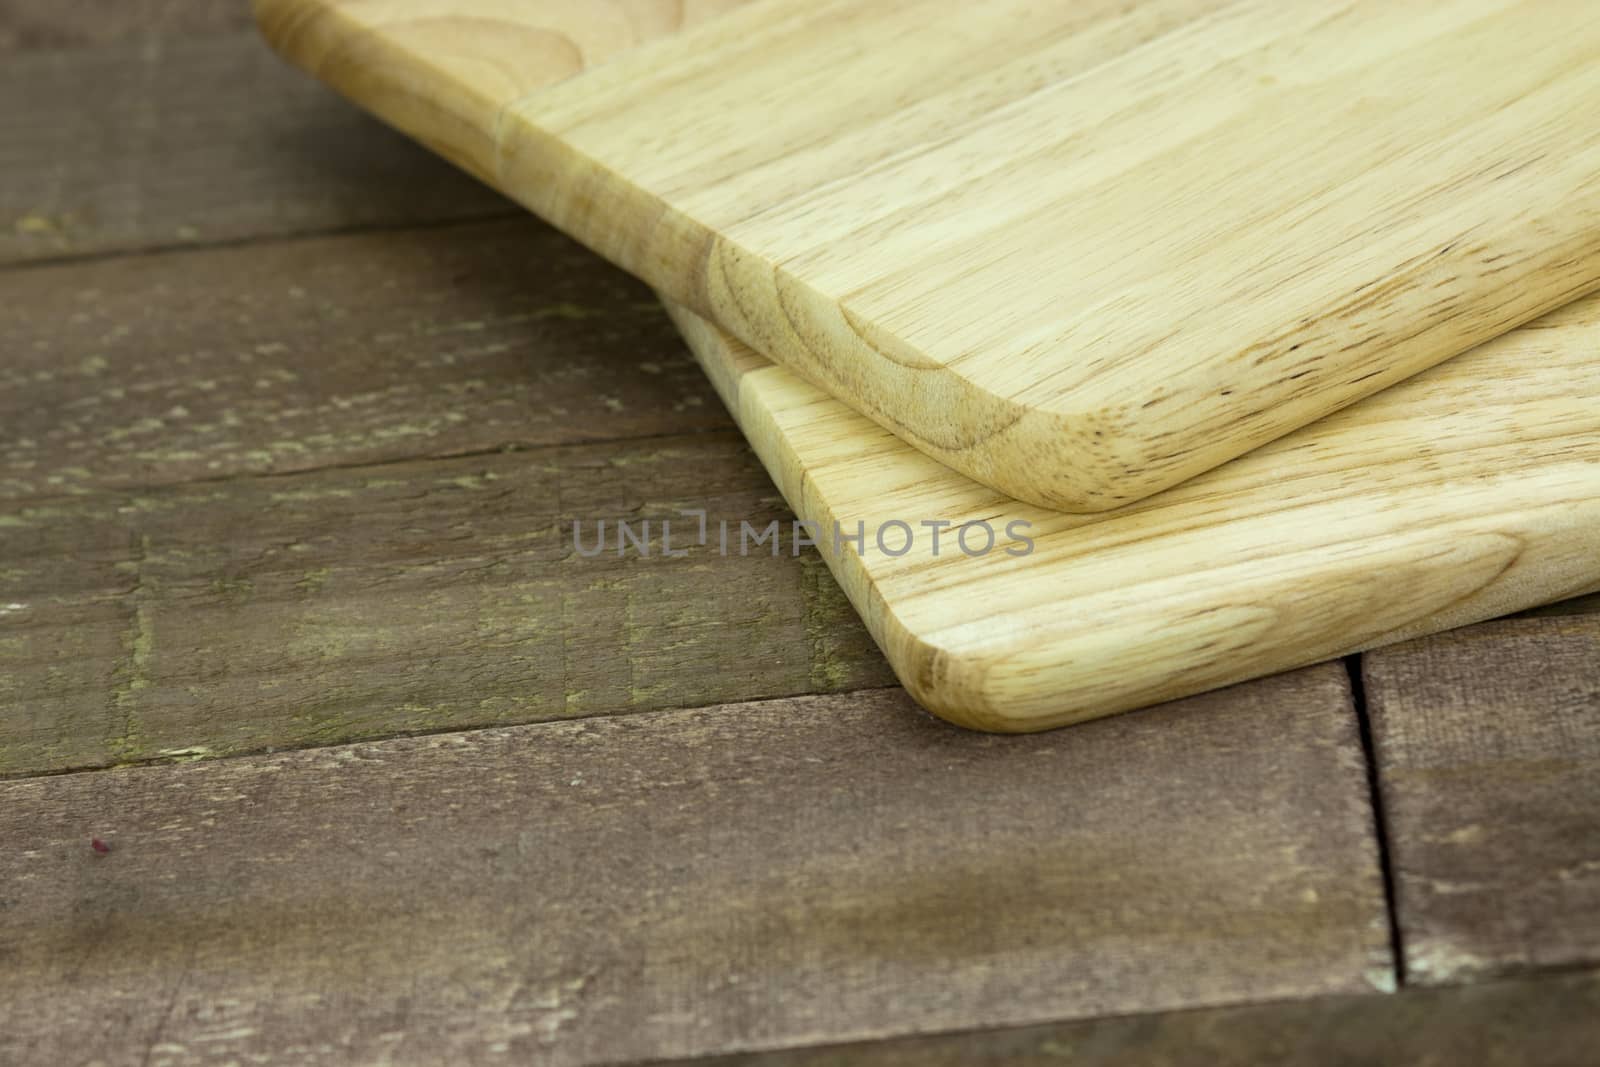 Wooden chopping board on an old table